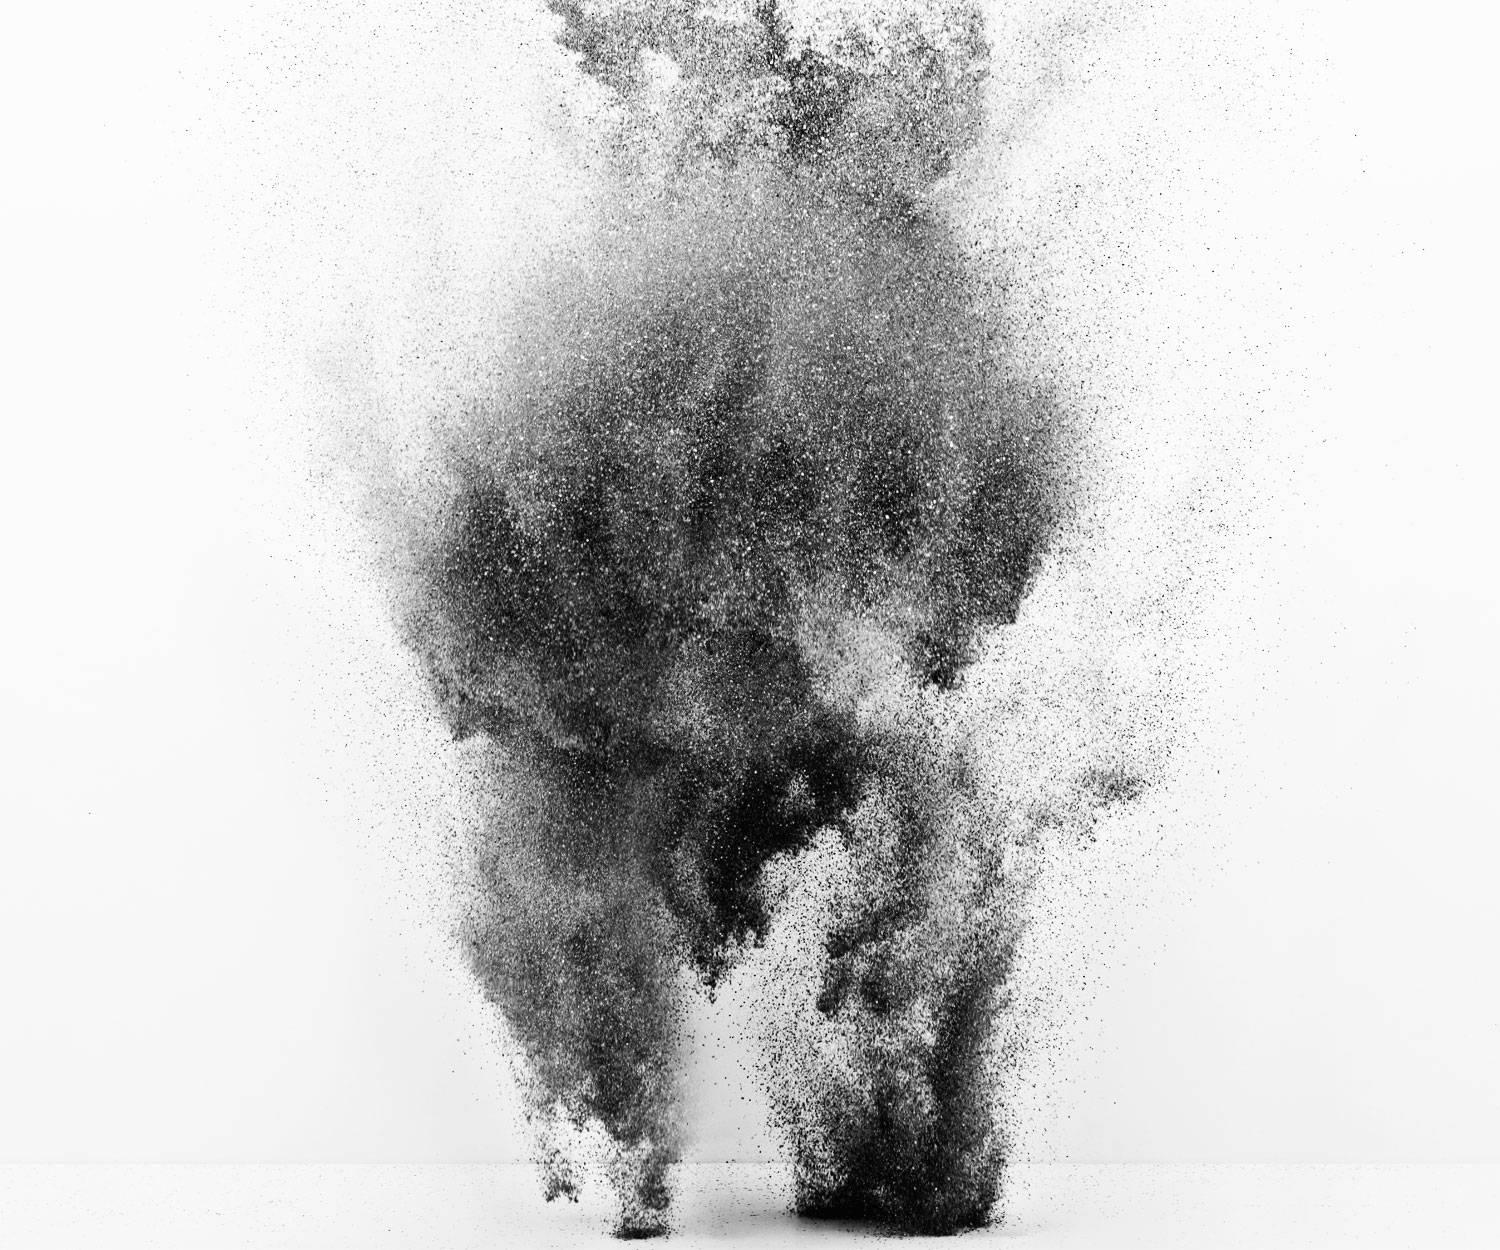 Yee Wong Abstract Photograph - Exploding Powder Movement: Black and White